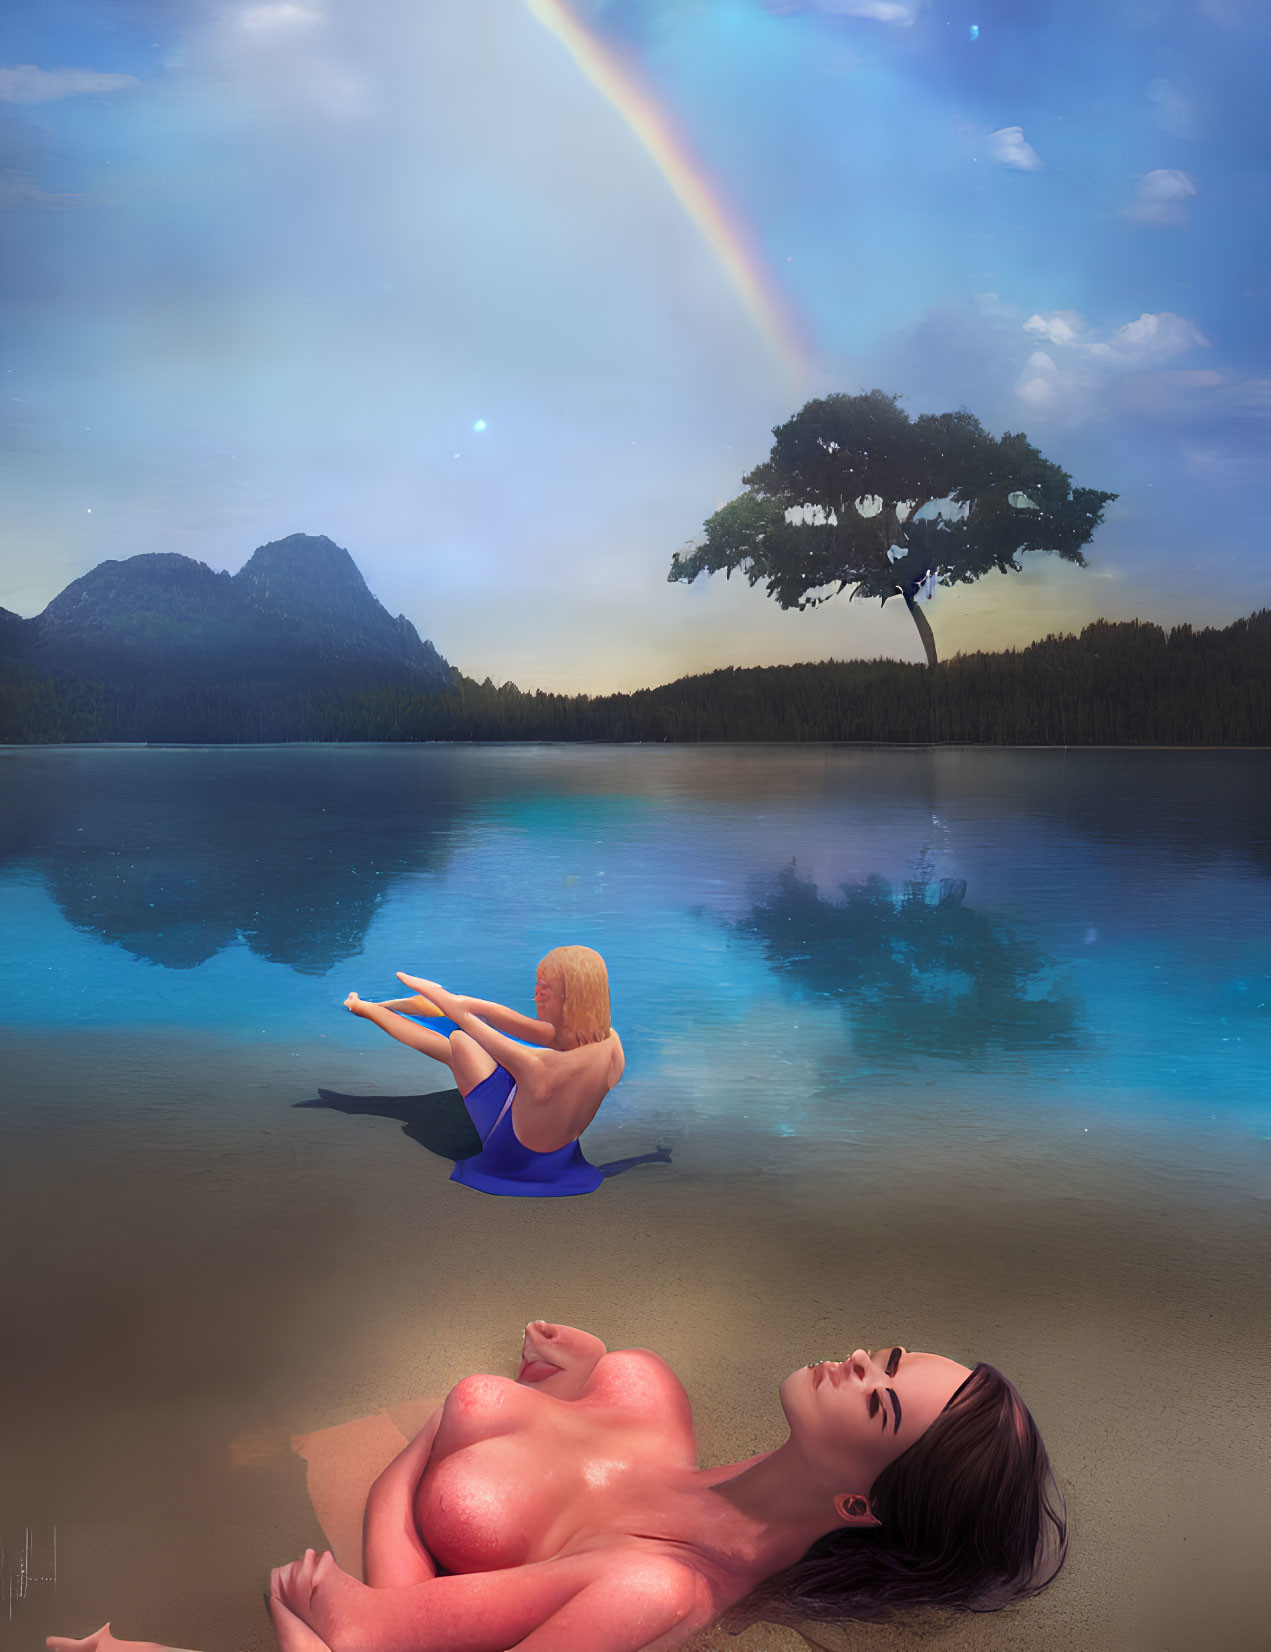 Woman lying on sandy shore gazes at surreal scene with figure on tree over calm lake and rainbow.